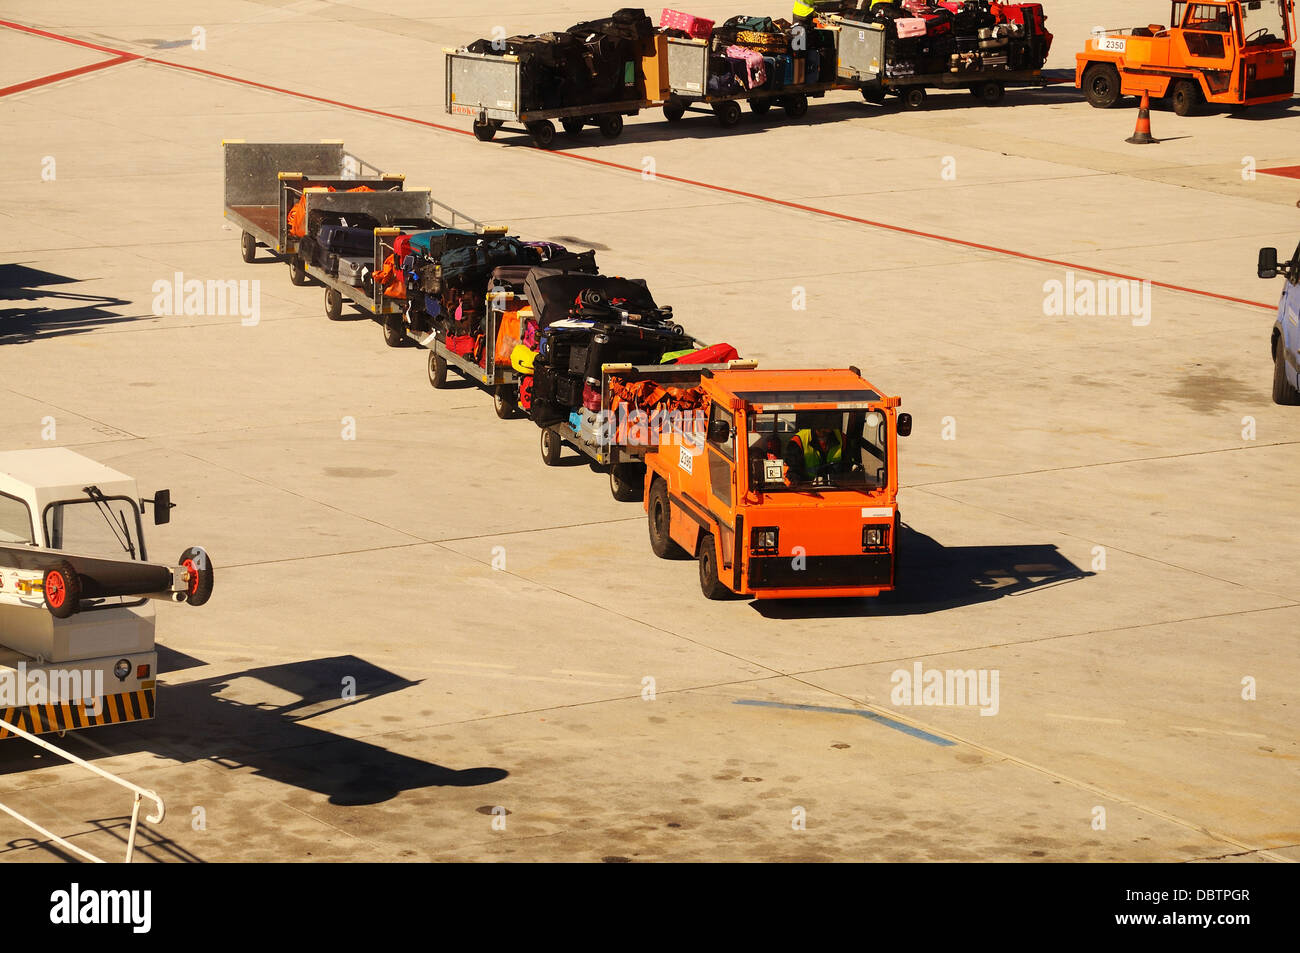 Baggage cart truck on the airport apron, Malaga, Andalusia, Spain, Western Europe. Stock Photo